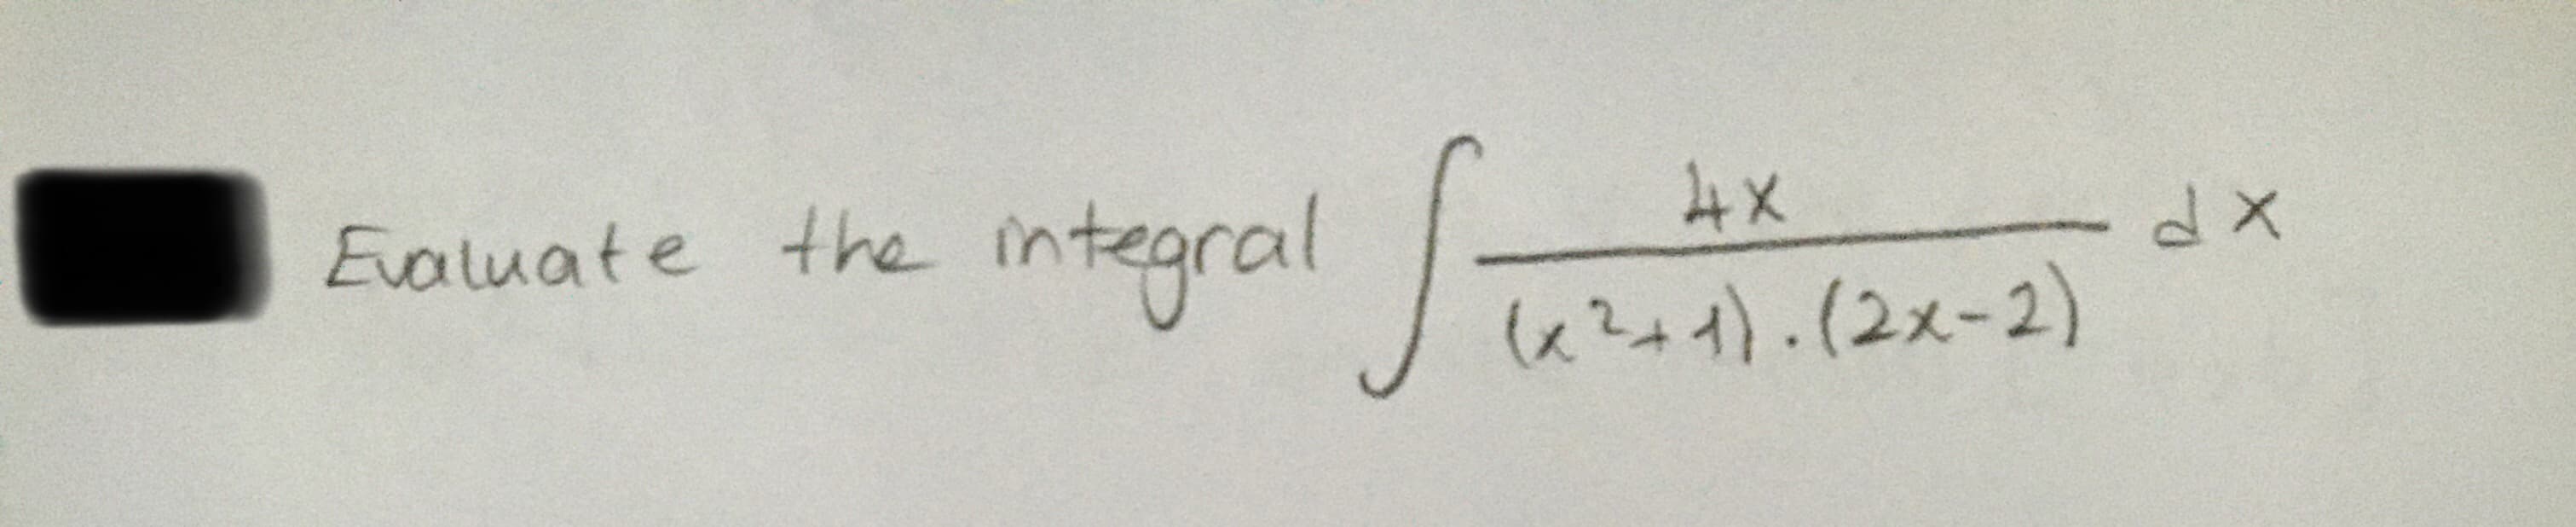 4x
Evaluate the in
integral
(6?++).(2x-2)
